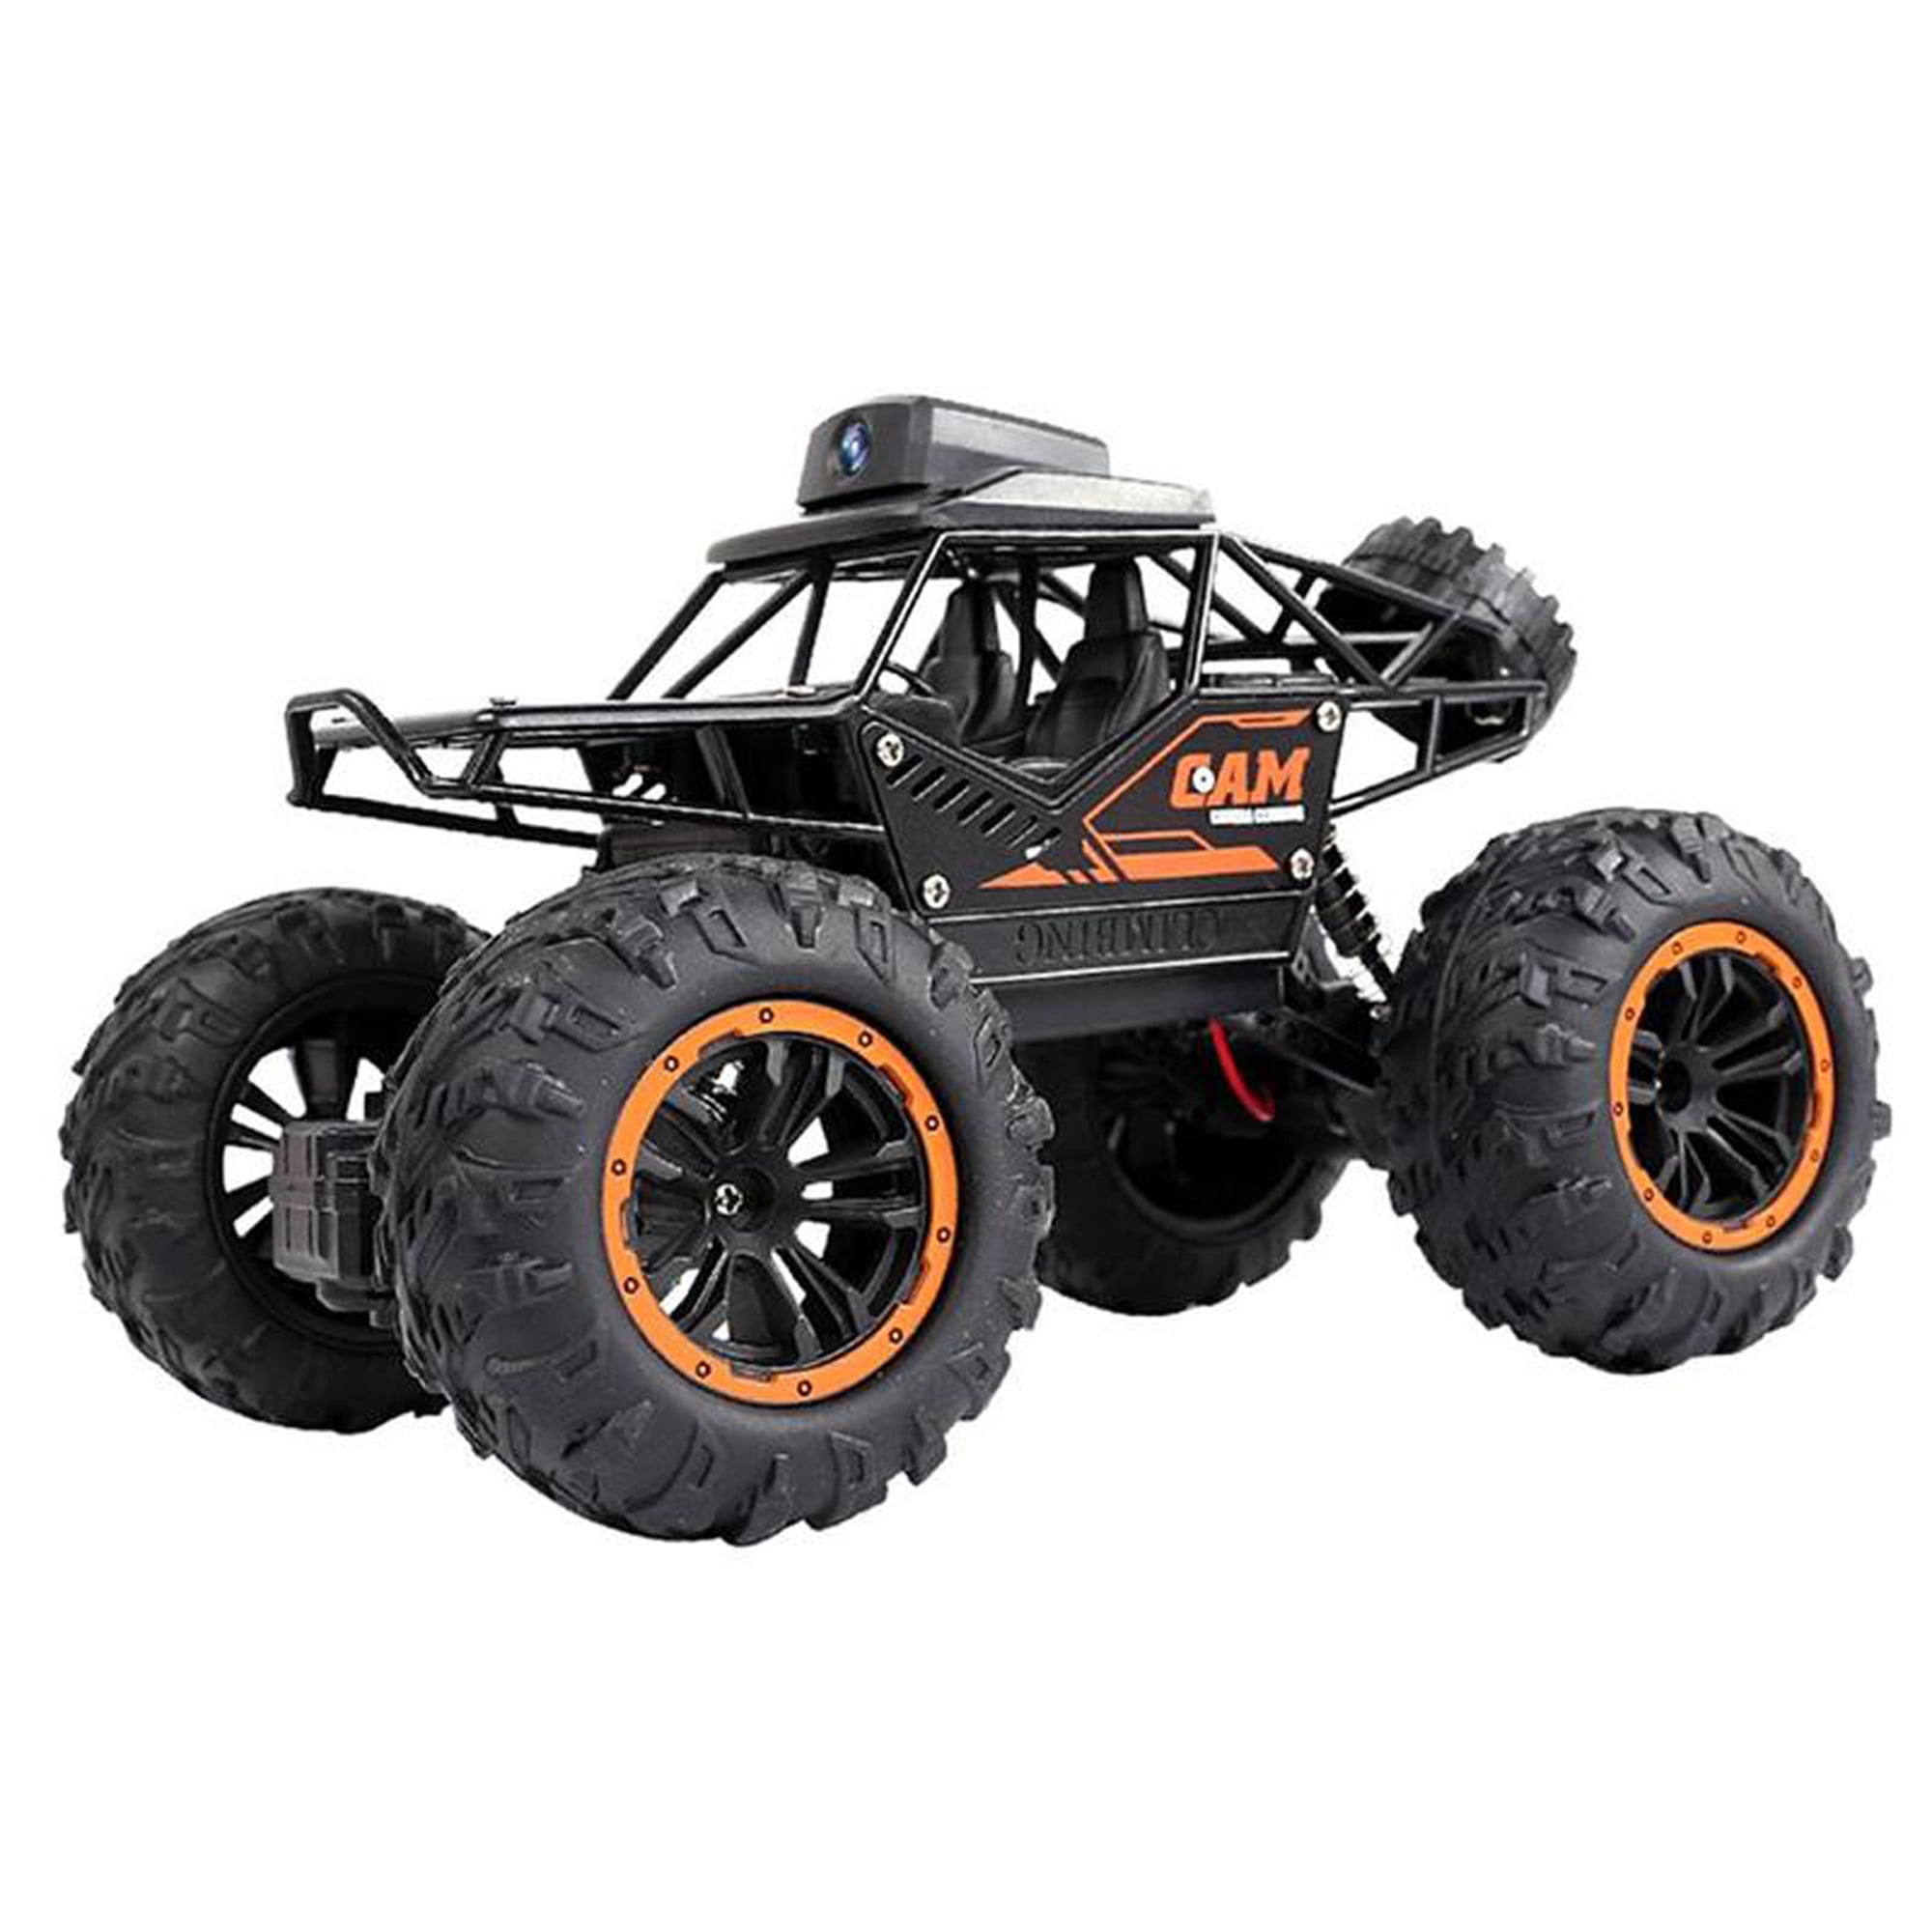 APP/WiFi HD Camera Car Remote Control Vehicle Model Toy with Light Crawler 